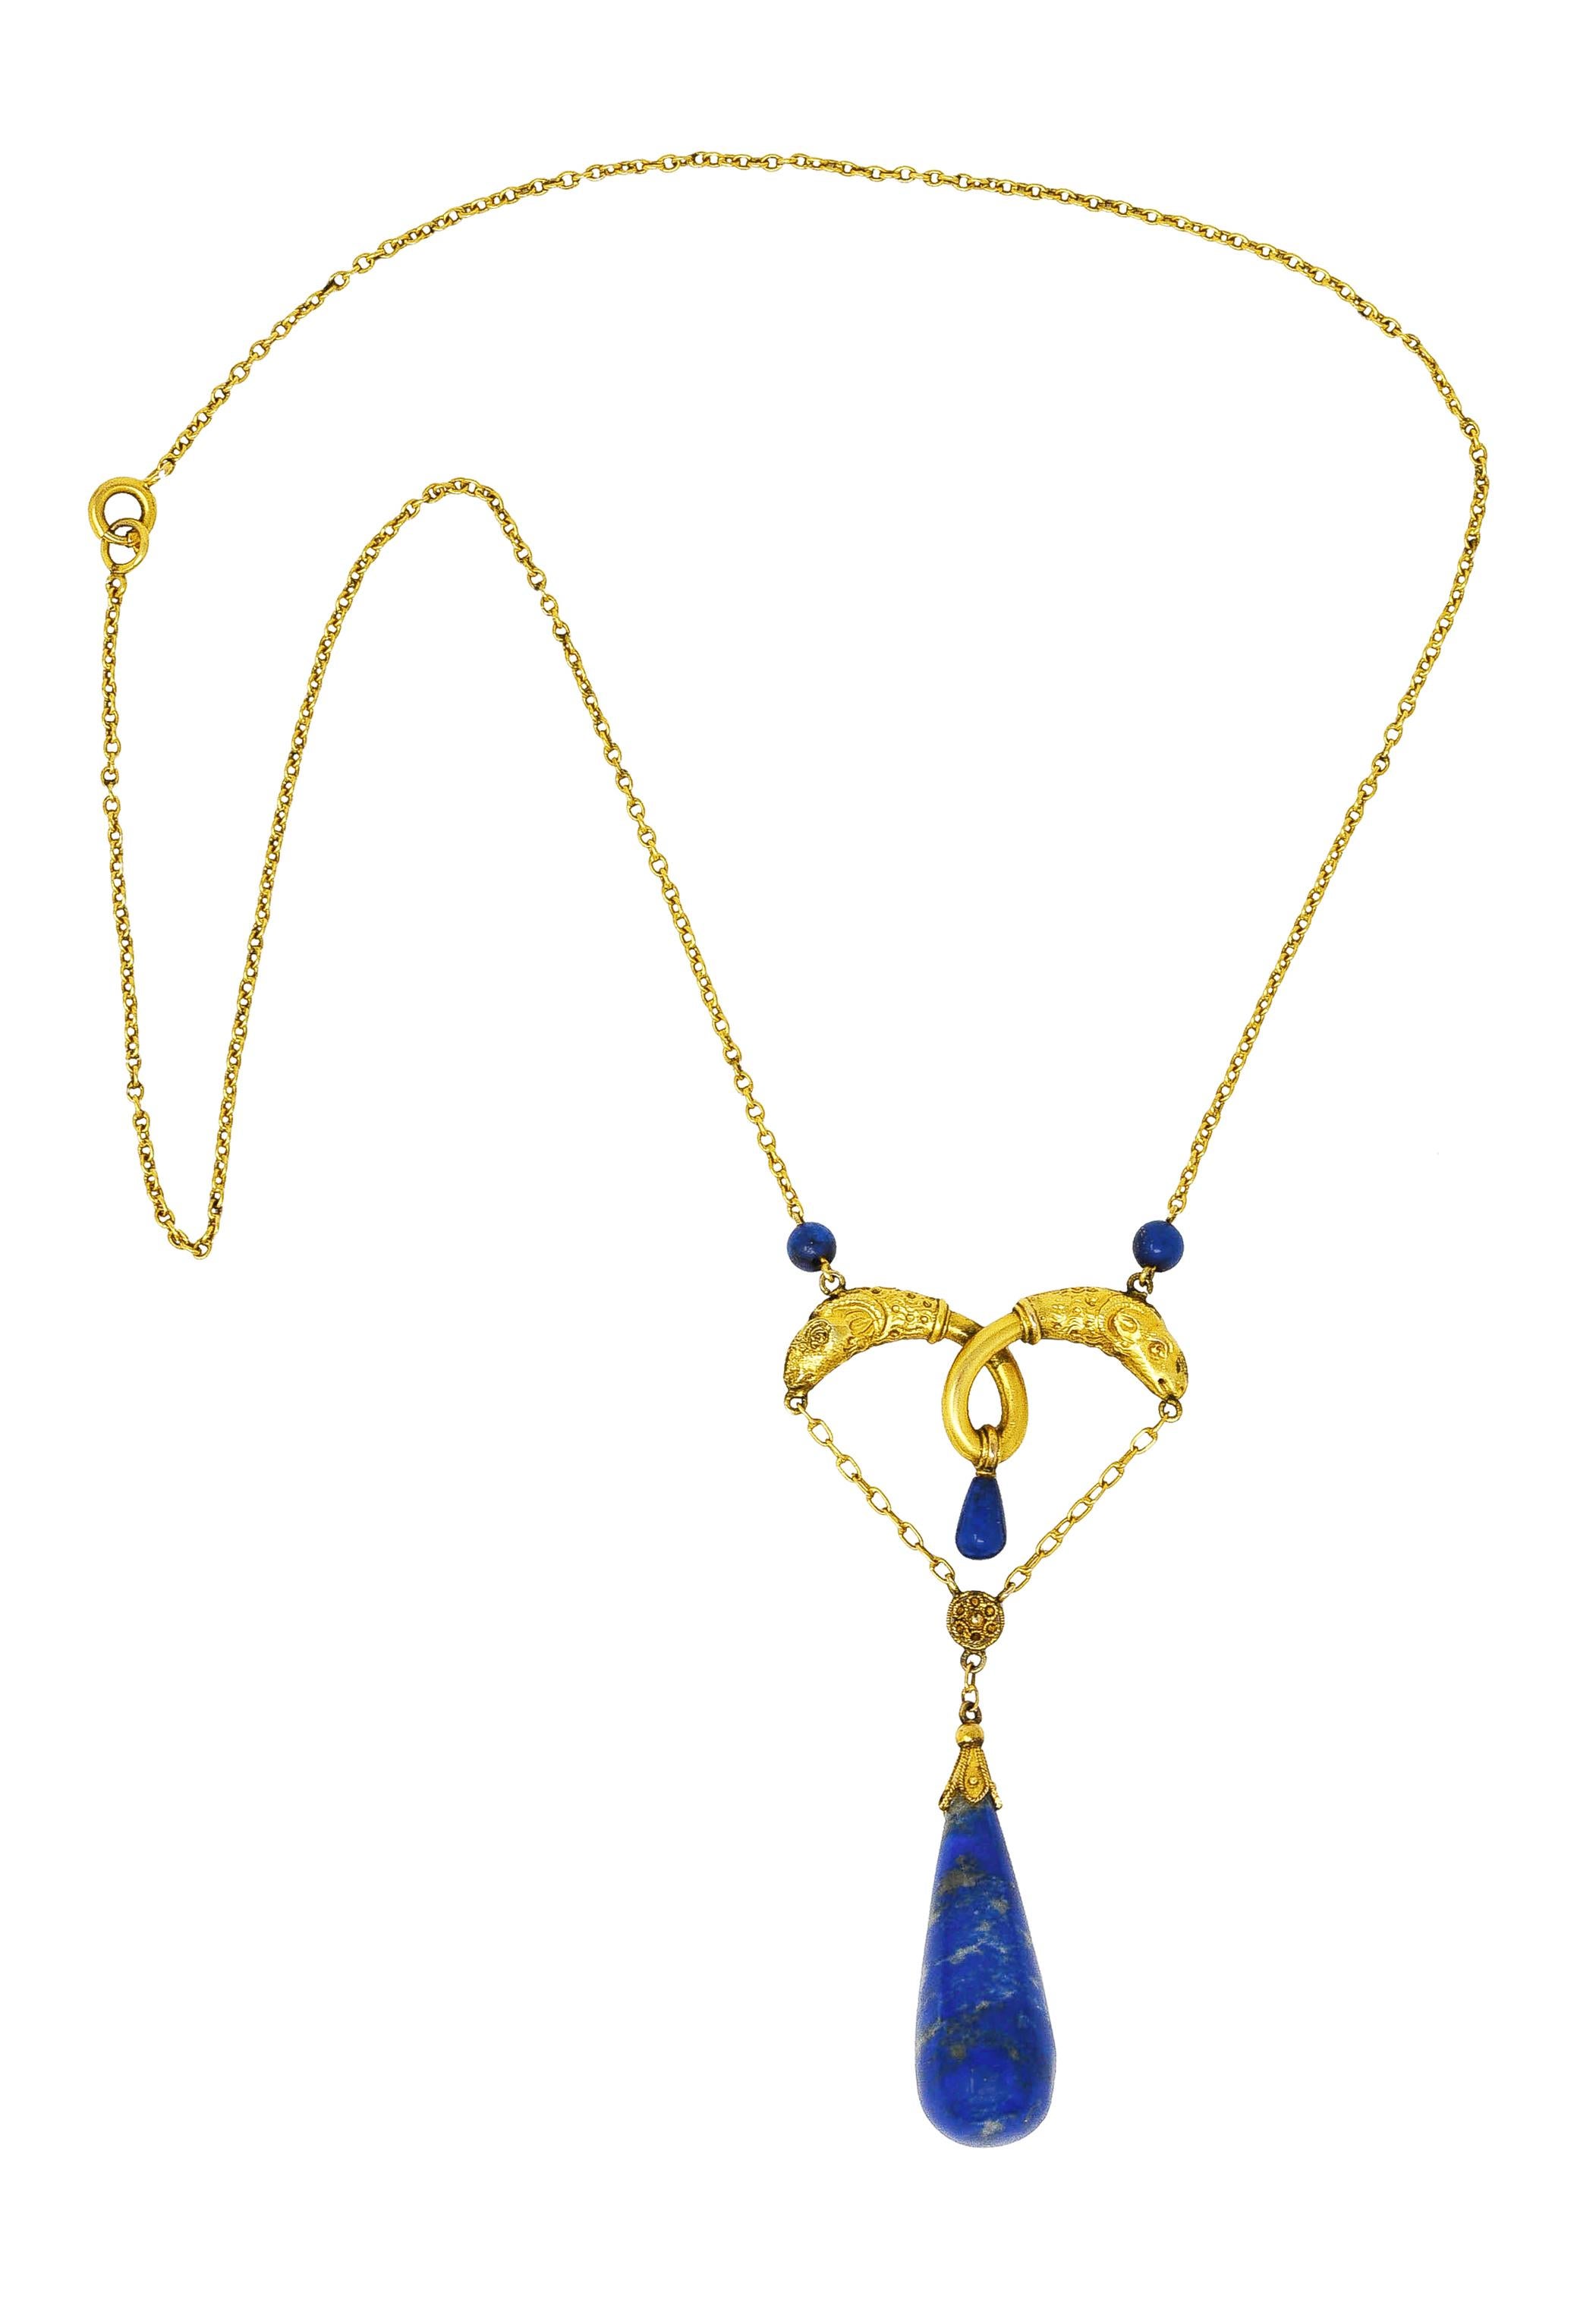 Necklace features a swagged central station with twisted wire terminating as two rams' heads. With textured horns and fur - suspending a lapis lazuli teardrop shaped bead from a floral surmount. Measuring 11.0 x 22.0 mm - opaque ultramarine blue